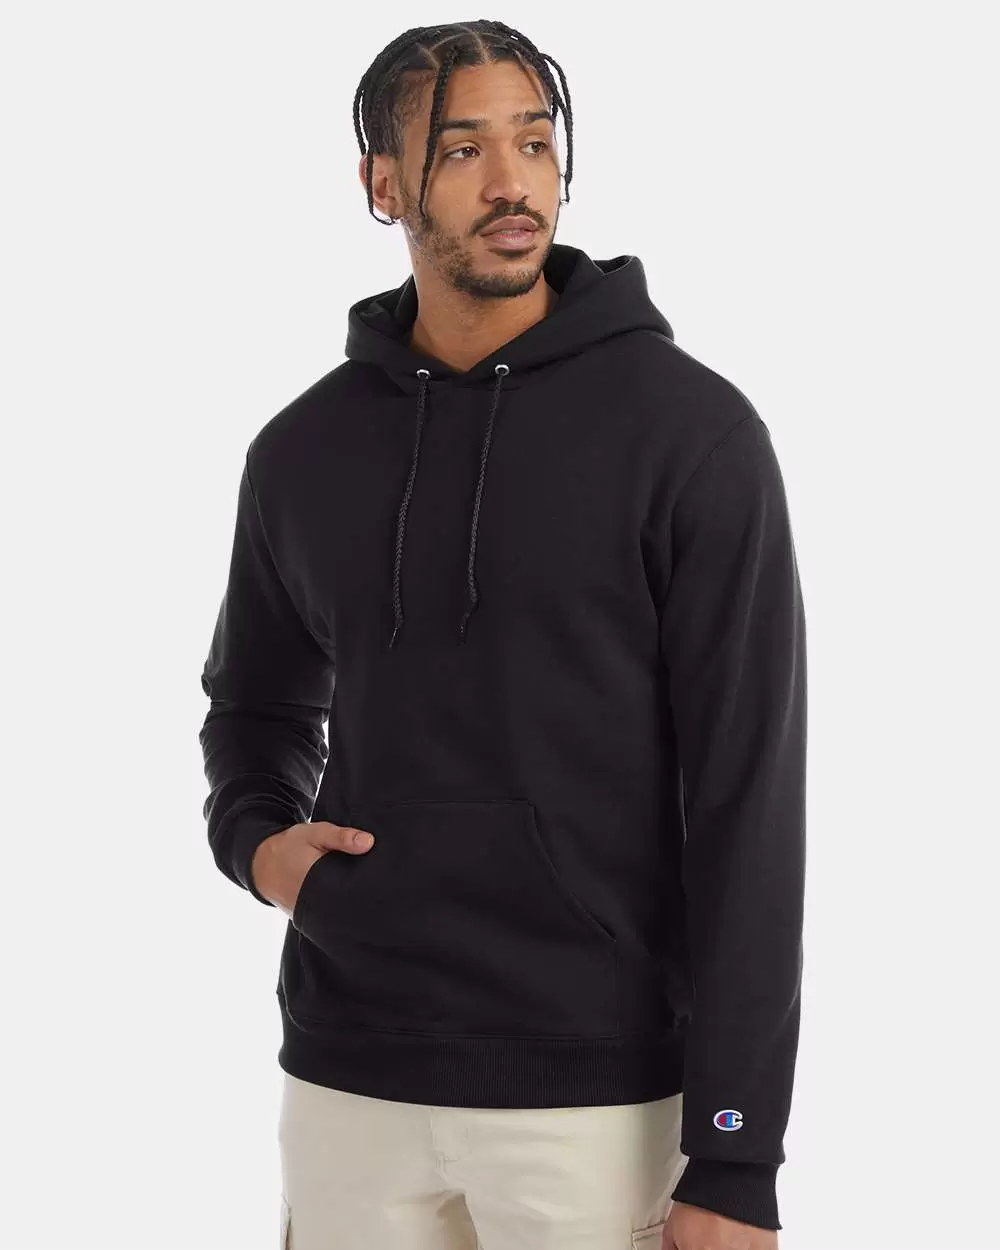 Champion 50/50 Pullover Hoodie - From $16.71